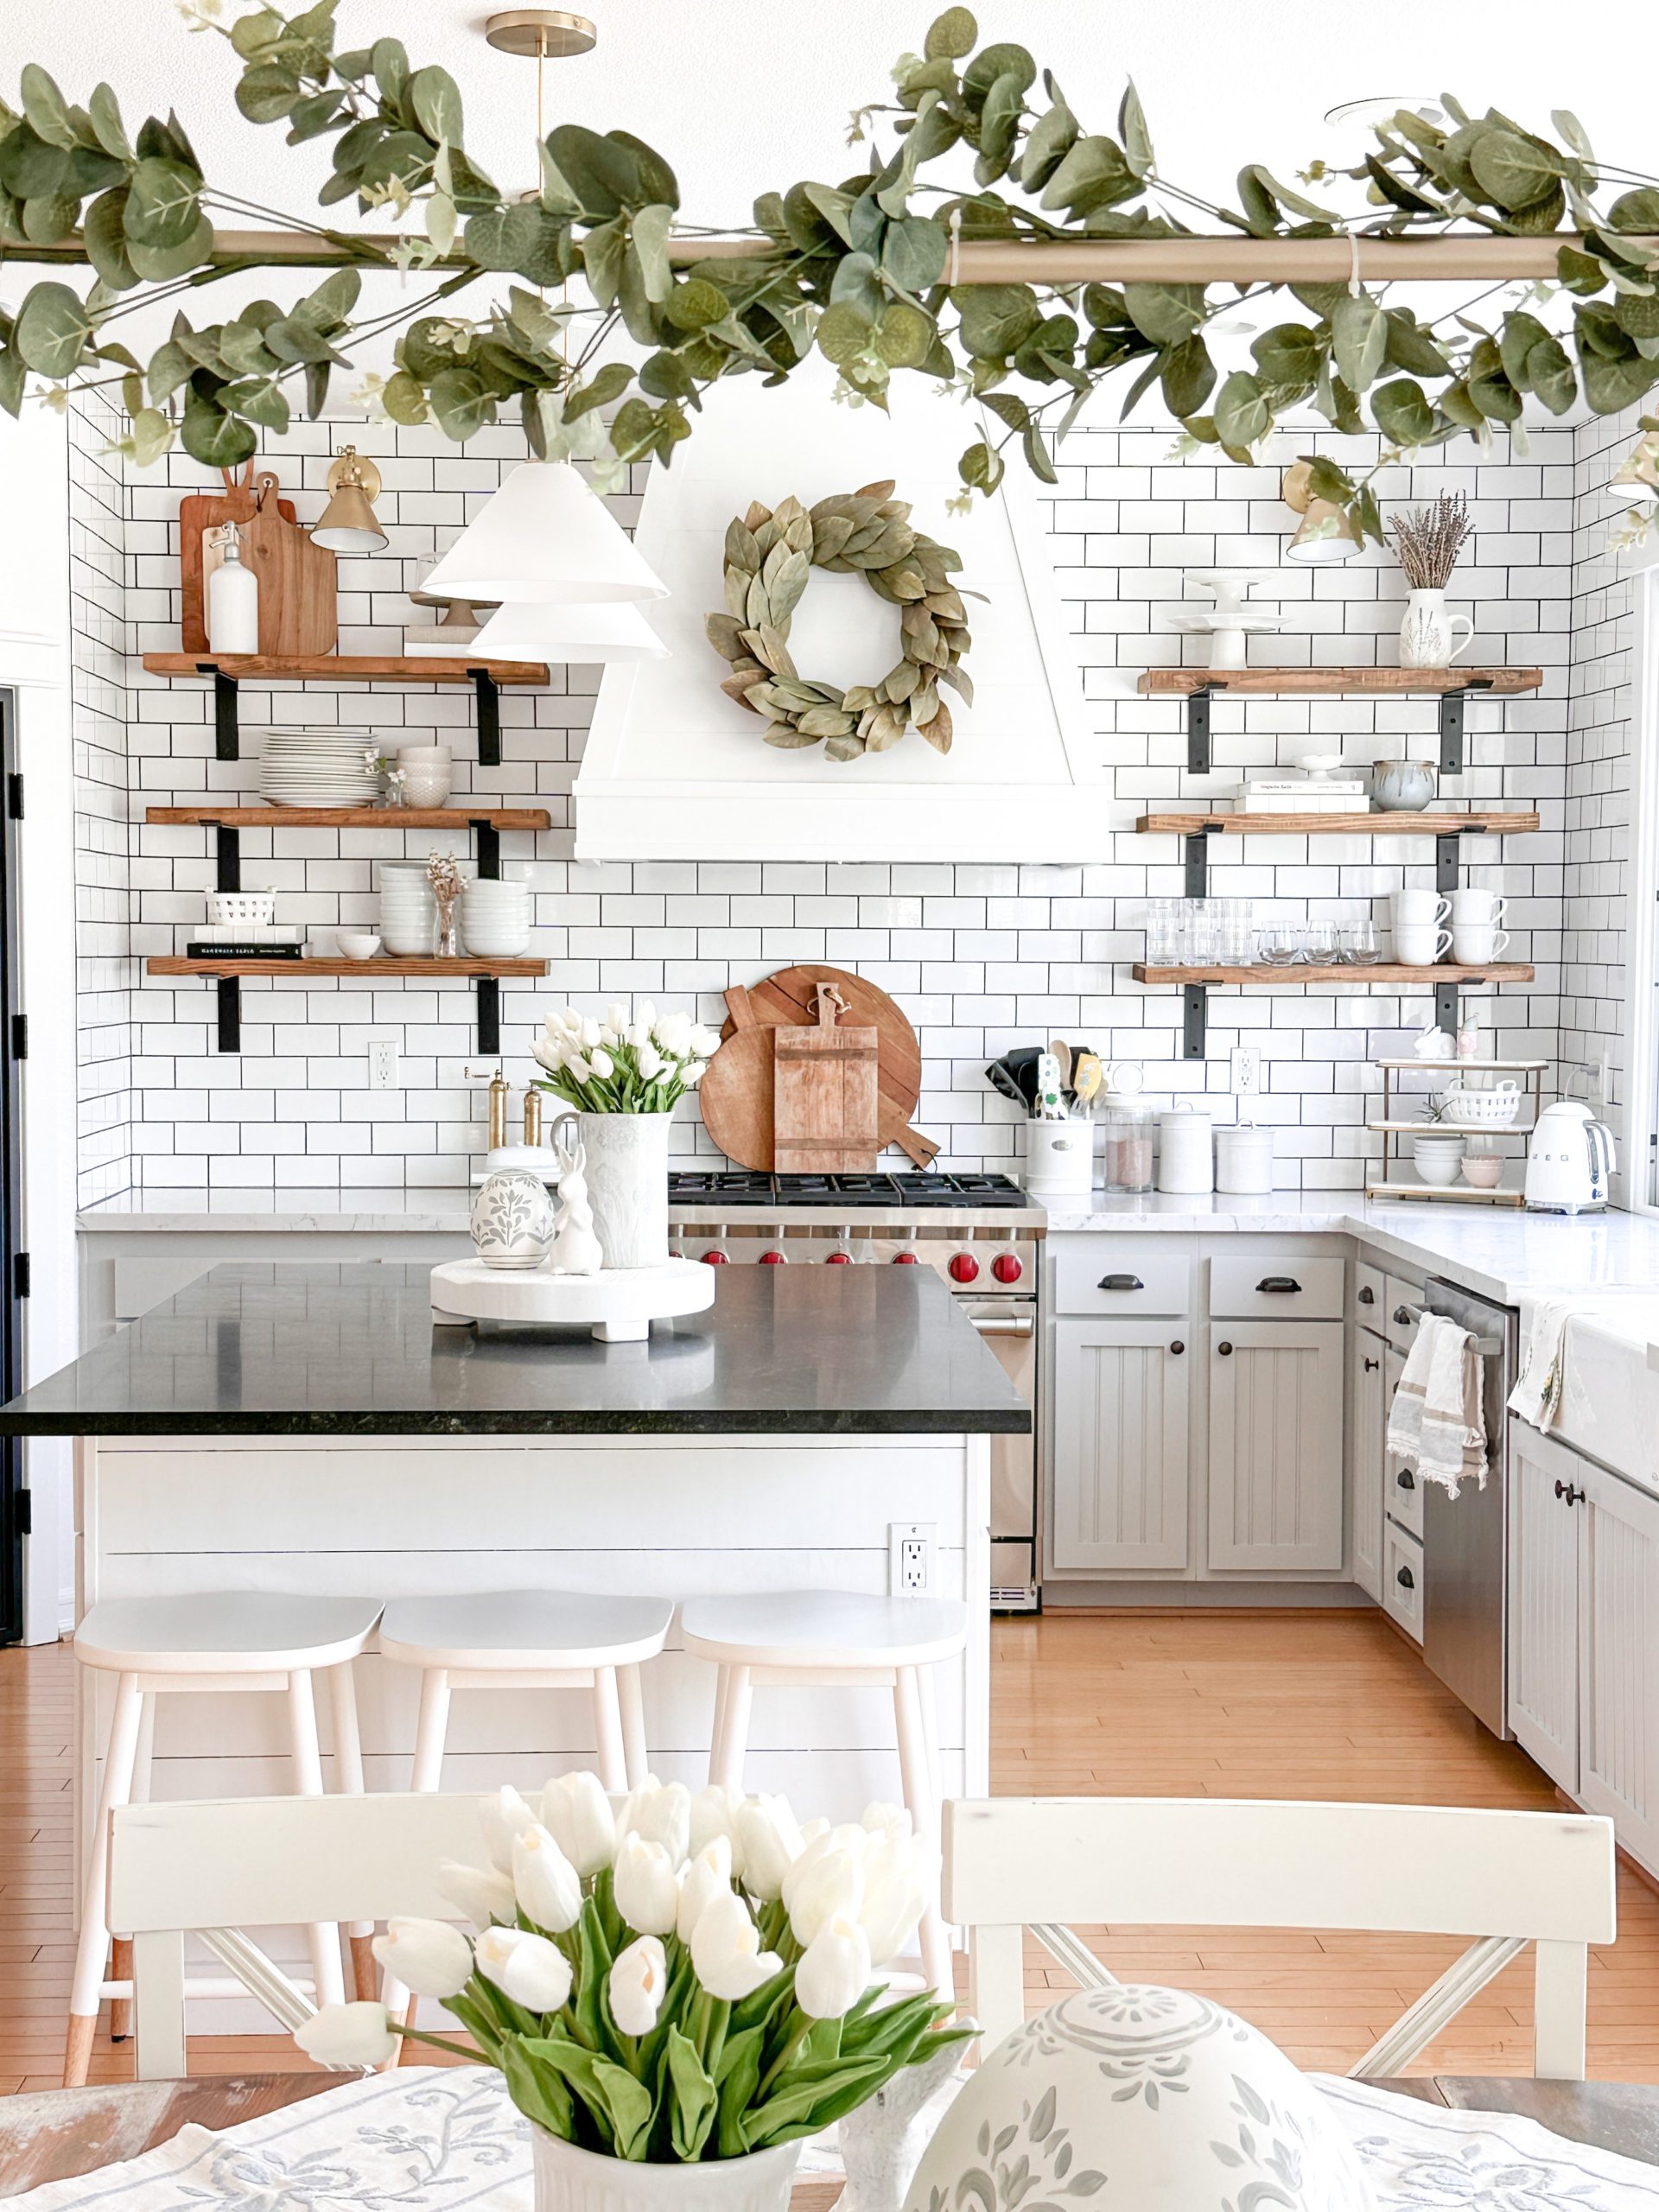 15 Kitchen Decorating Posts You Need To